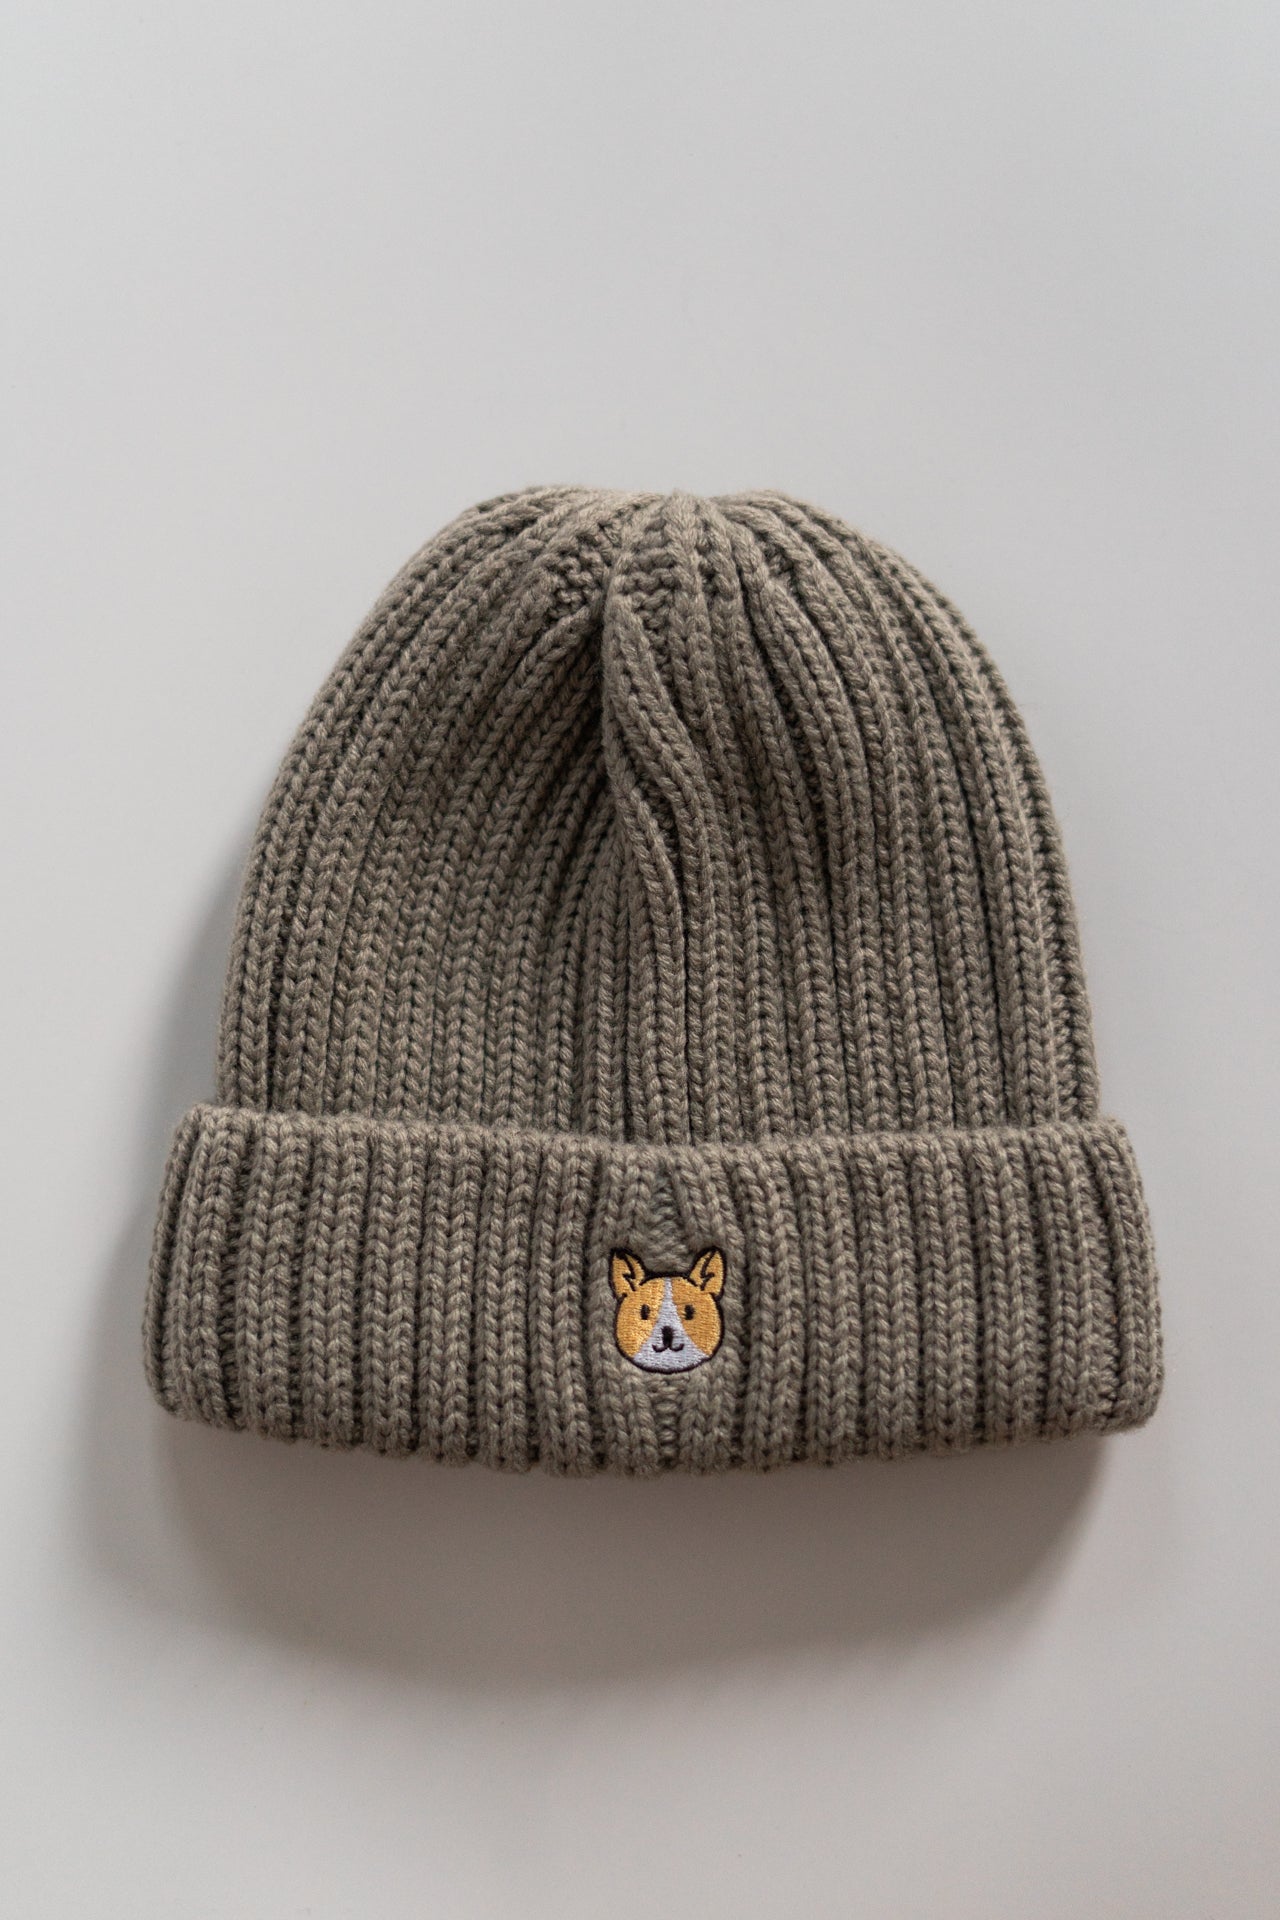 Embroidered Ribbed Knit Acrylic Wool Beanie Hat